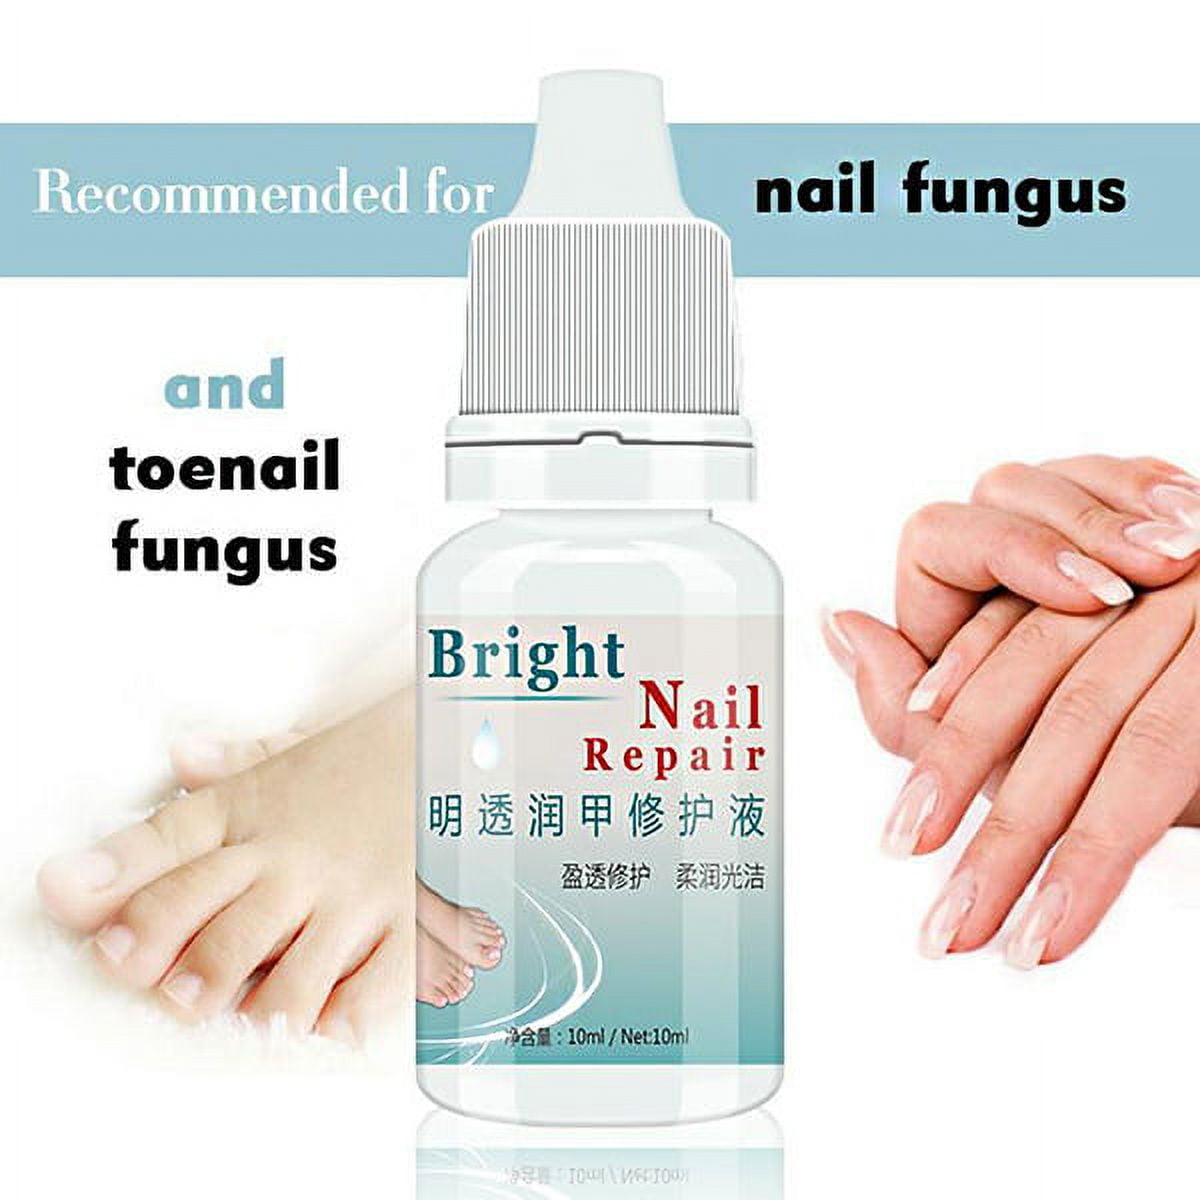 Curing Nail Fungus | Newtown, Pennsylvania Foot Specialist